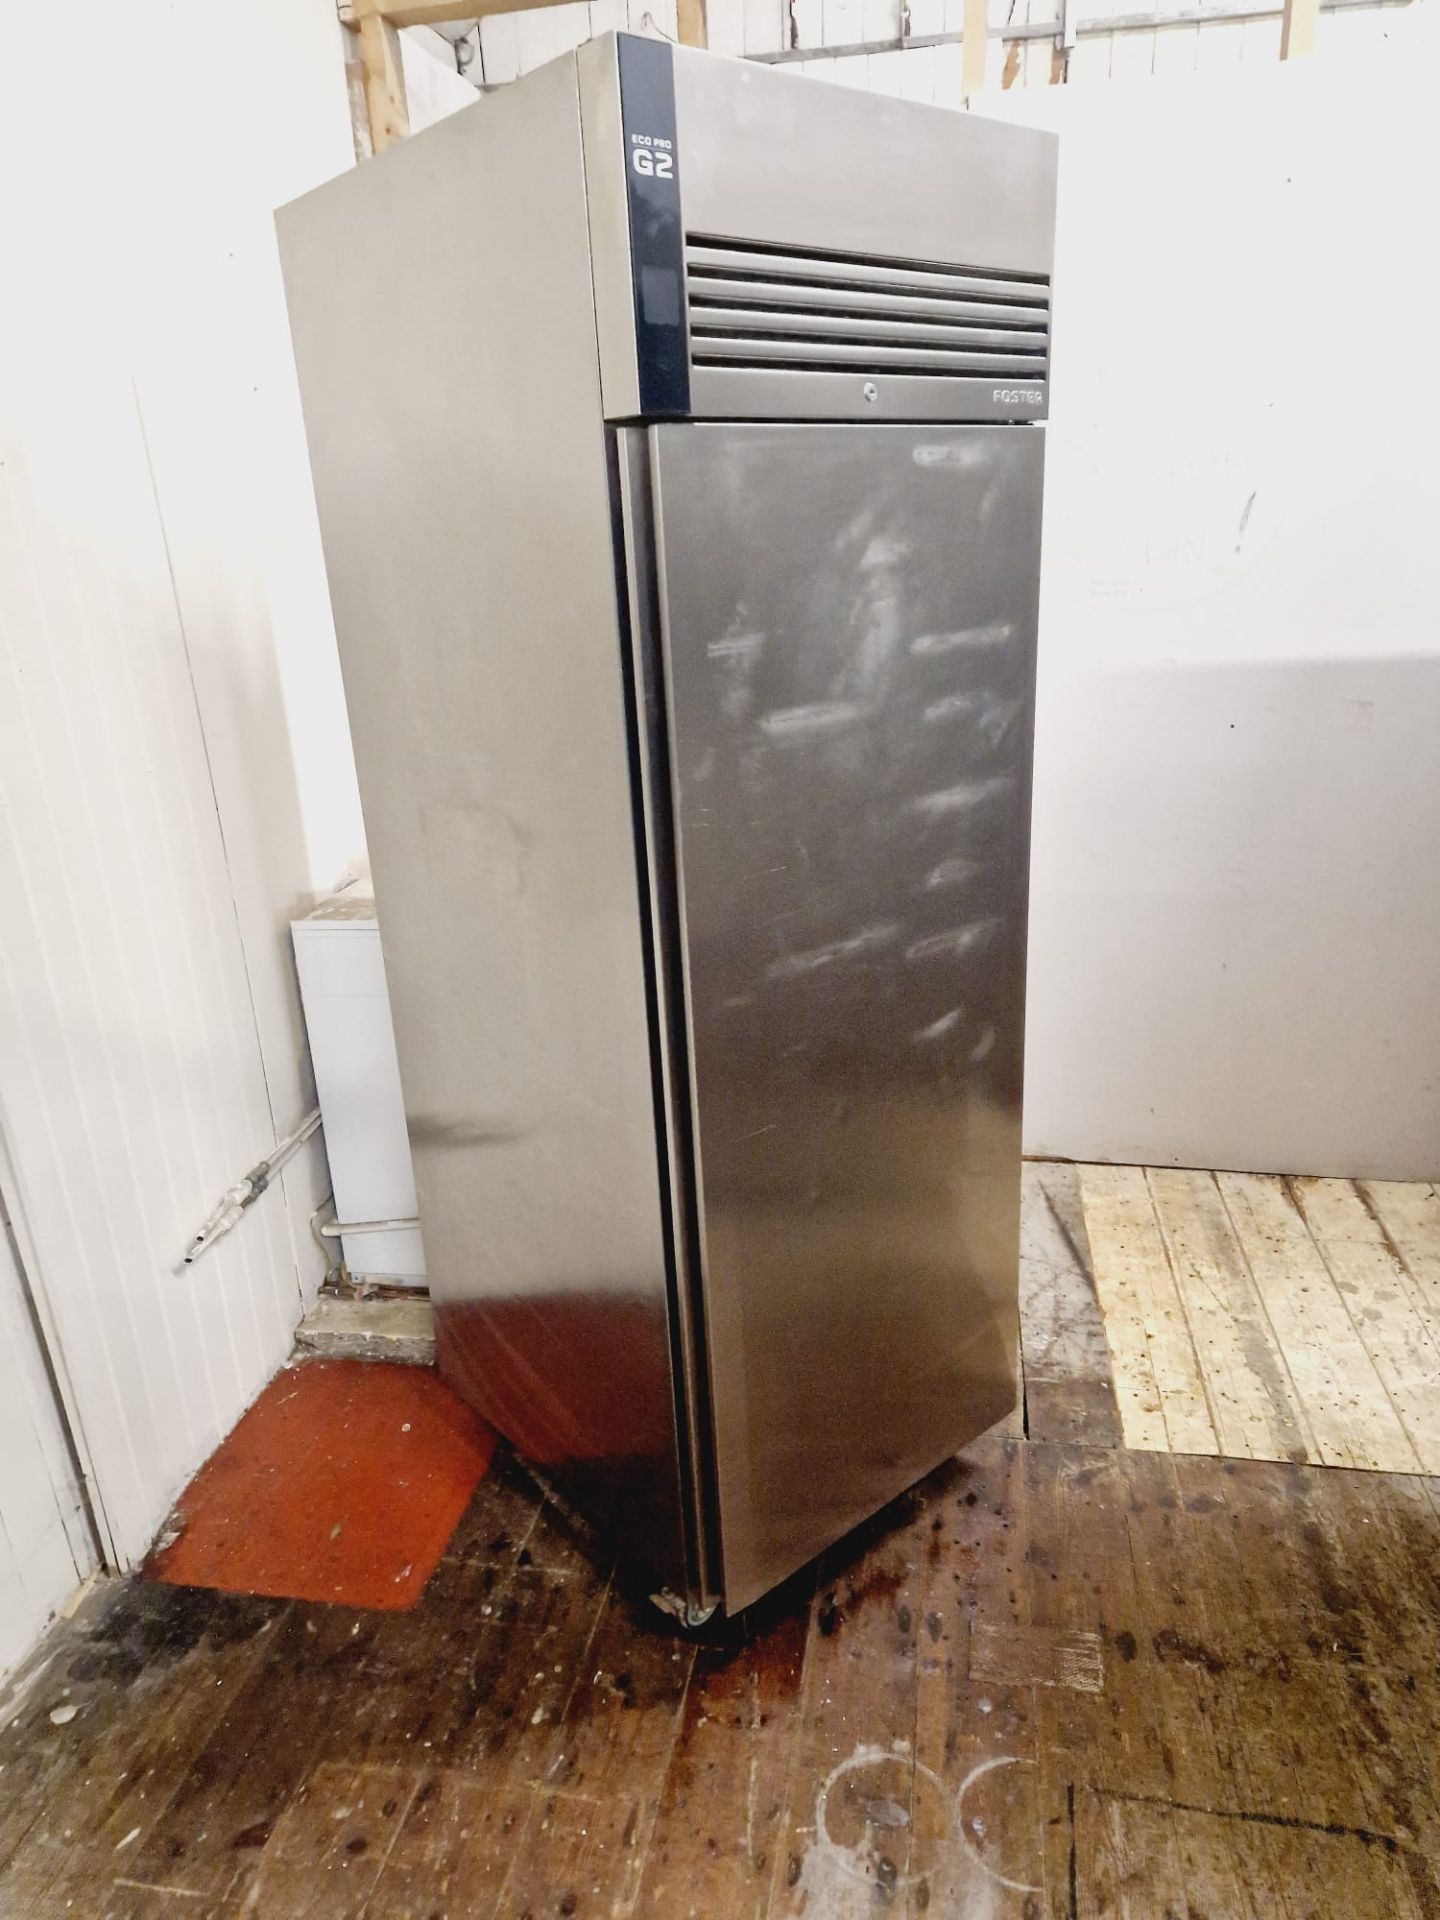 FOSTER G2 UPRIGHT FRIDGE +1 +4 - 600 LITRE - STAINLESS STEEL - FULLY WORKING AND SERVICED